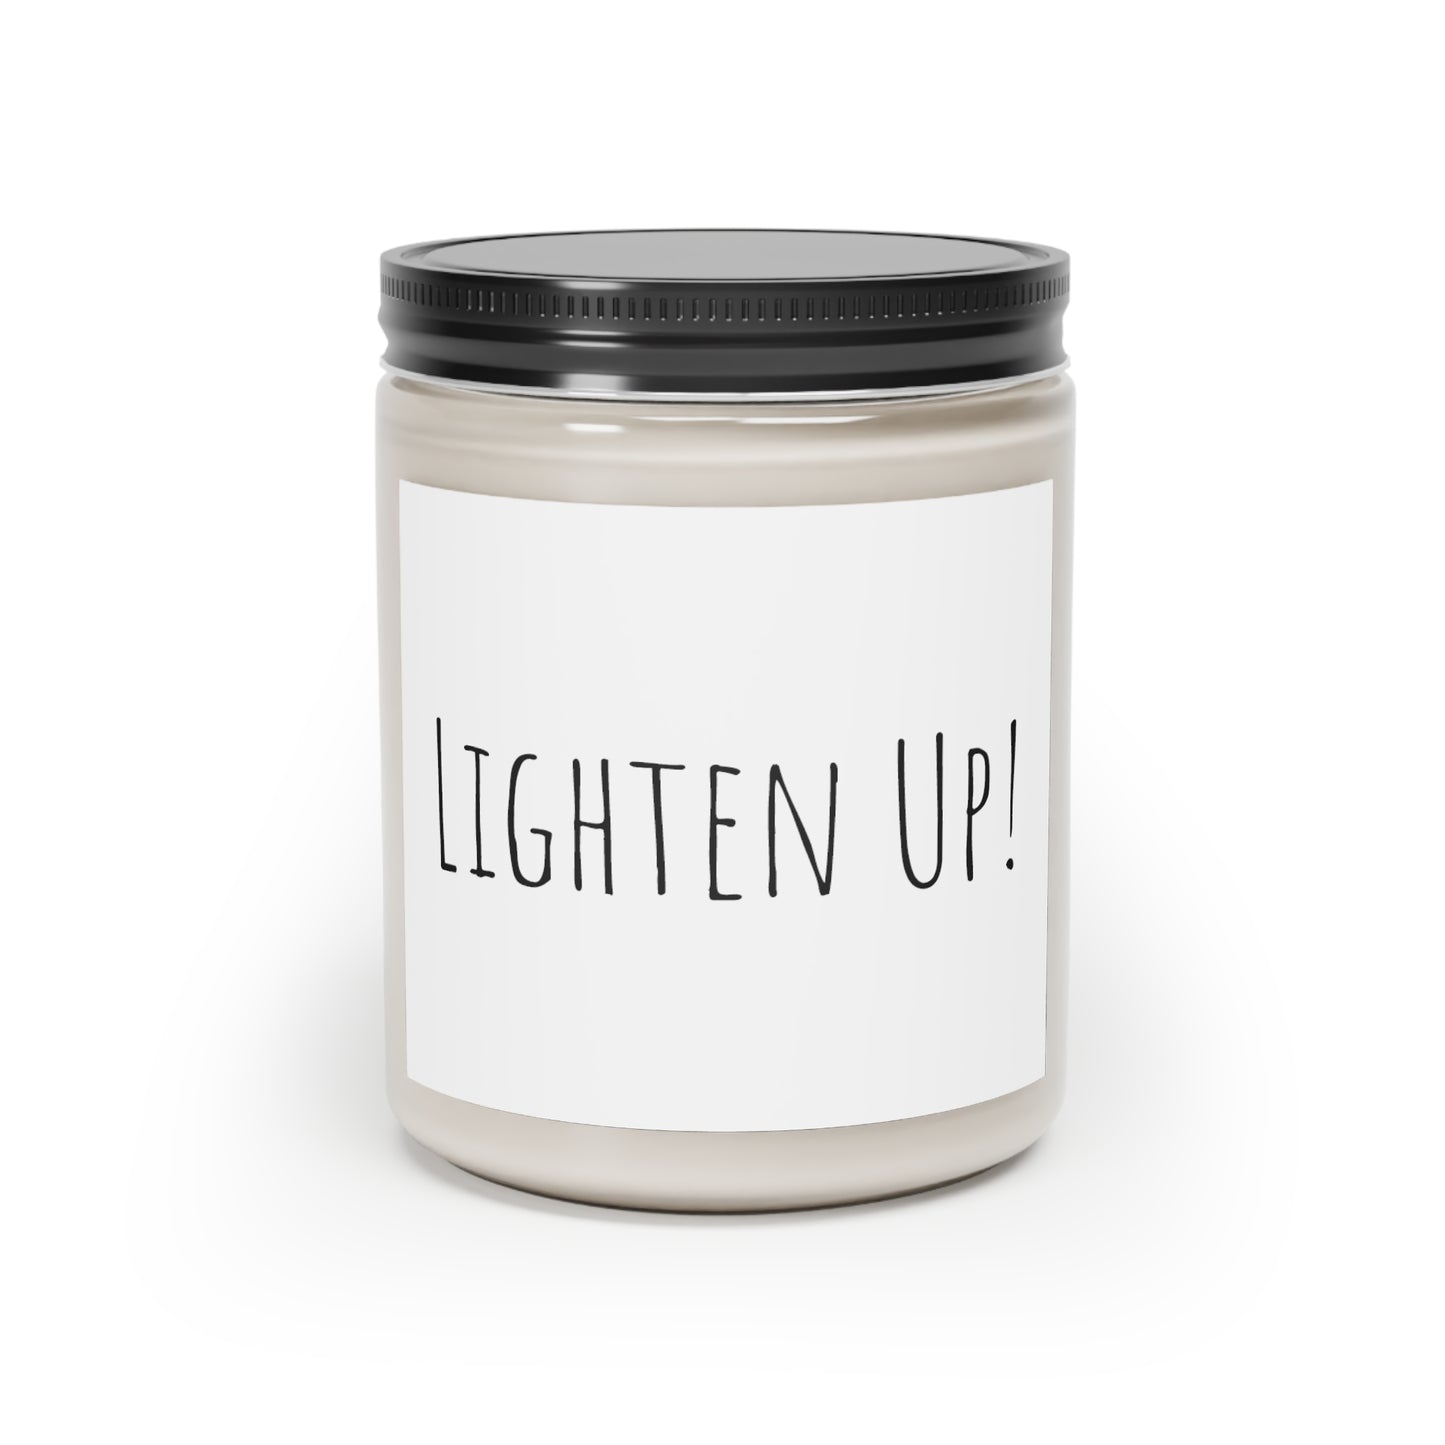 Scented Candle - Lighten Up! | Cinnamon Stick Scent | 9oz